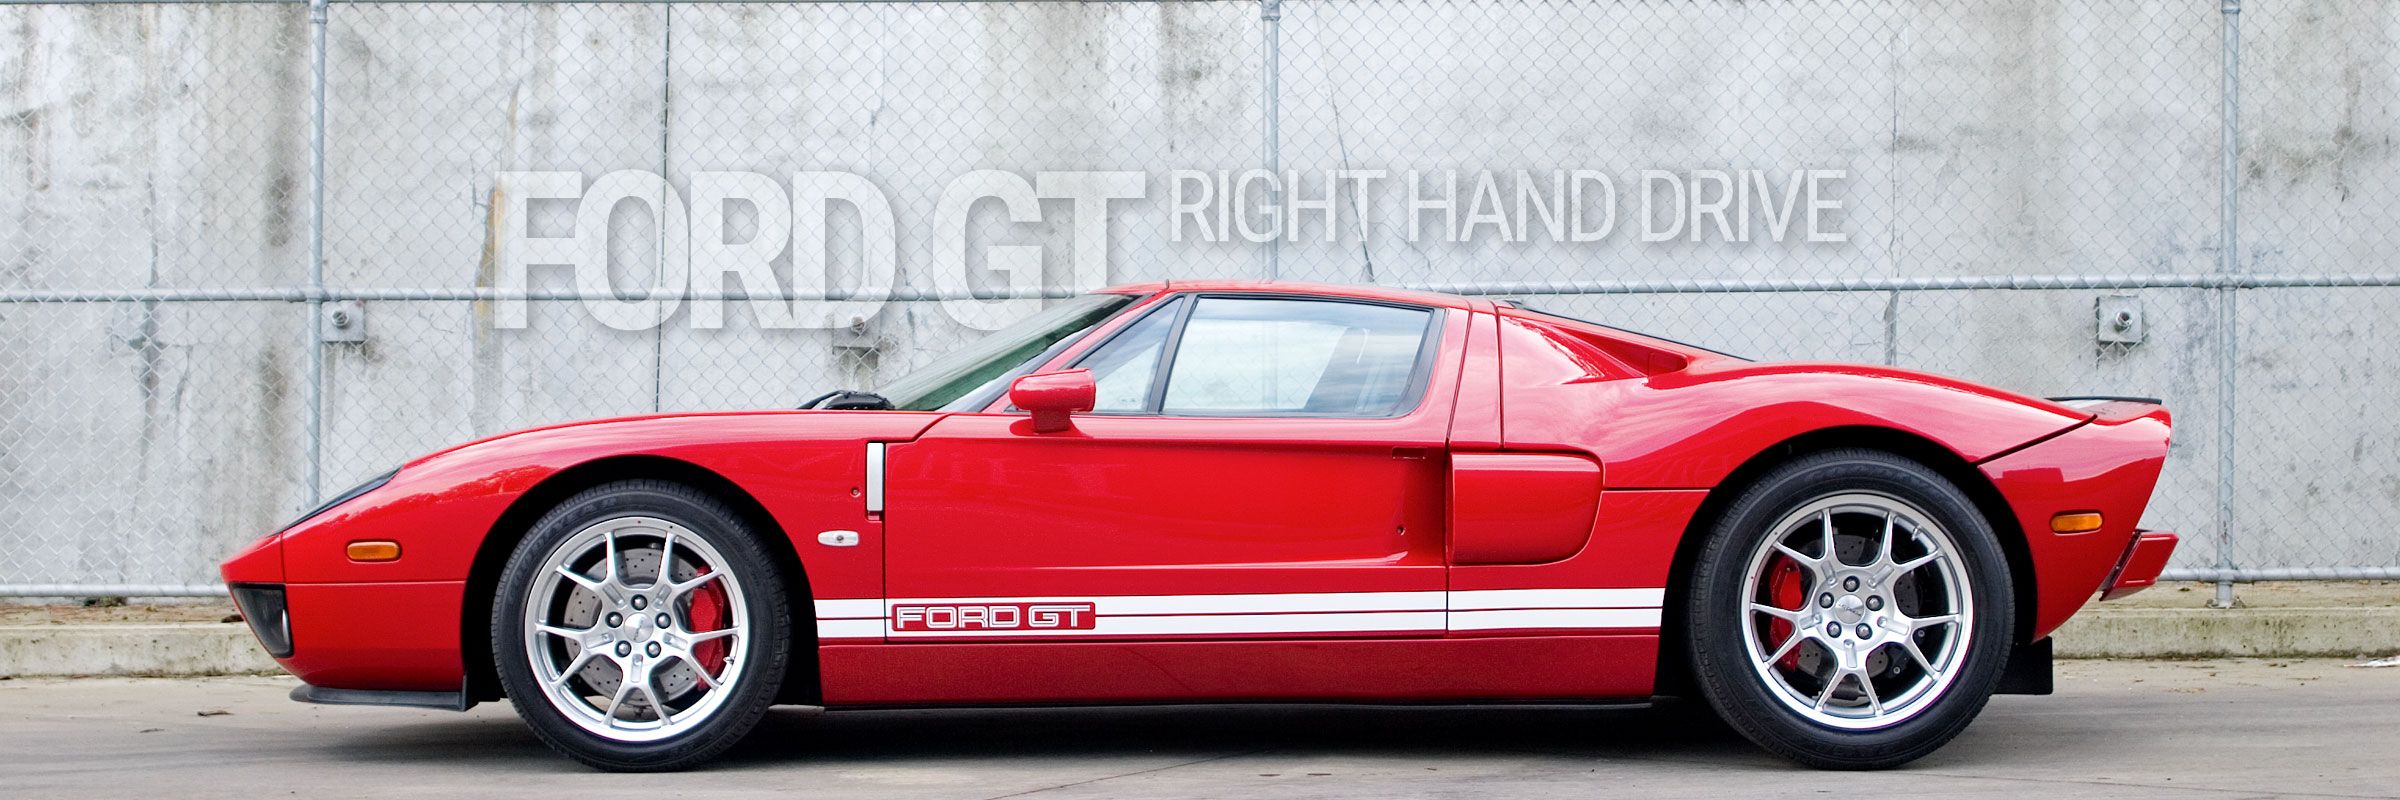 Ford GT Supercar Right Hand Drive